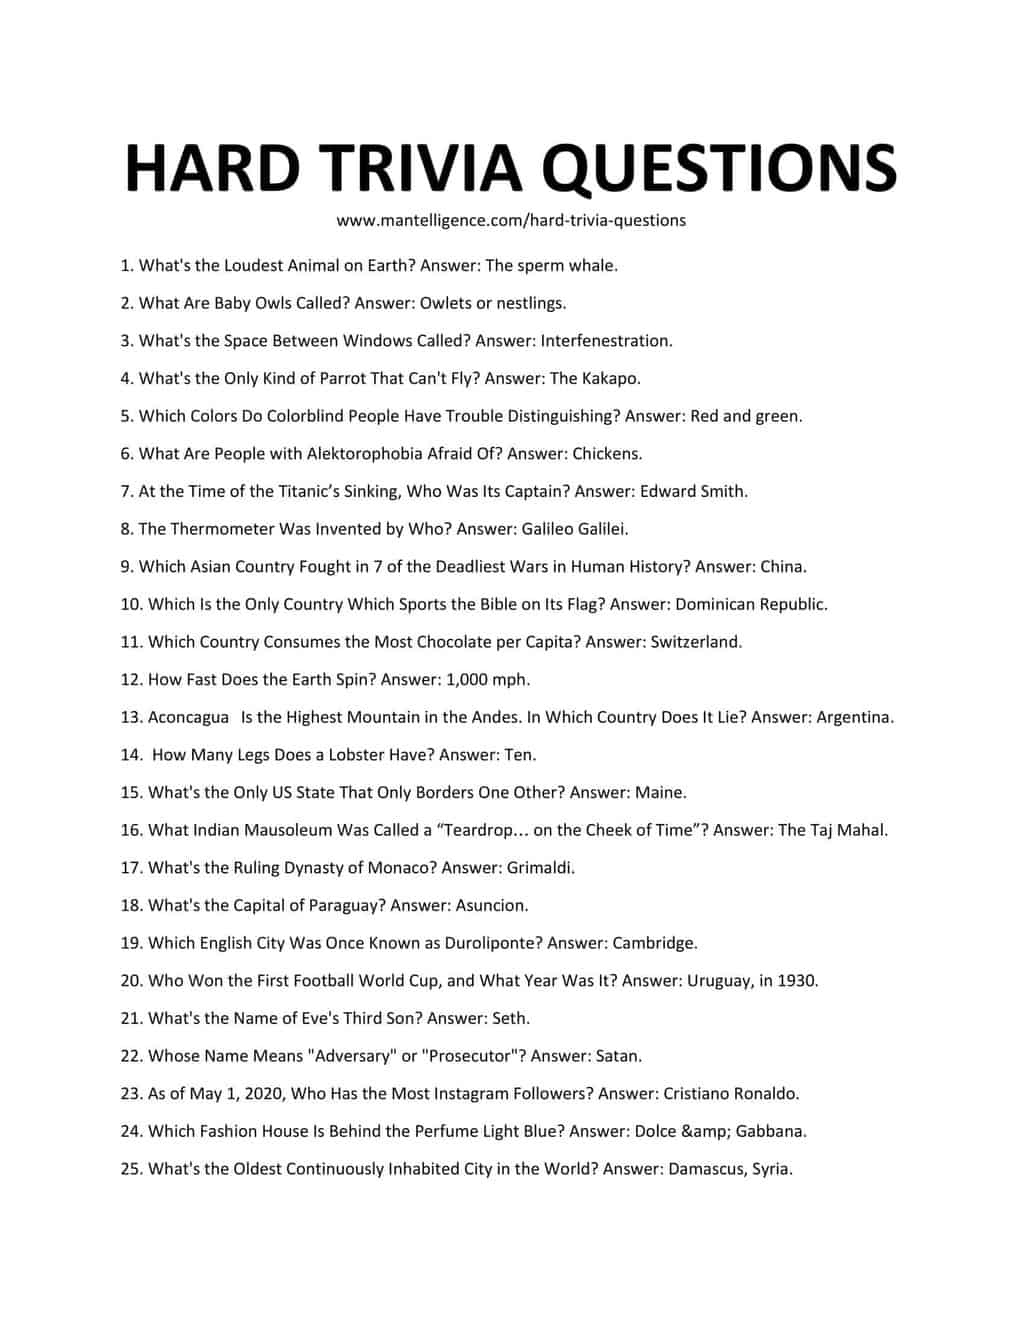 Hard Trivia Questions And Answers For Adults